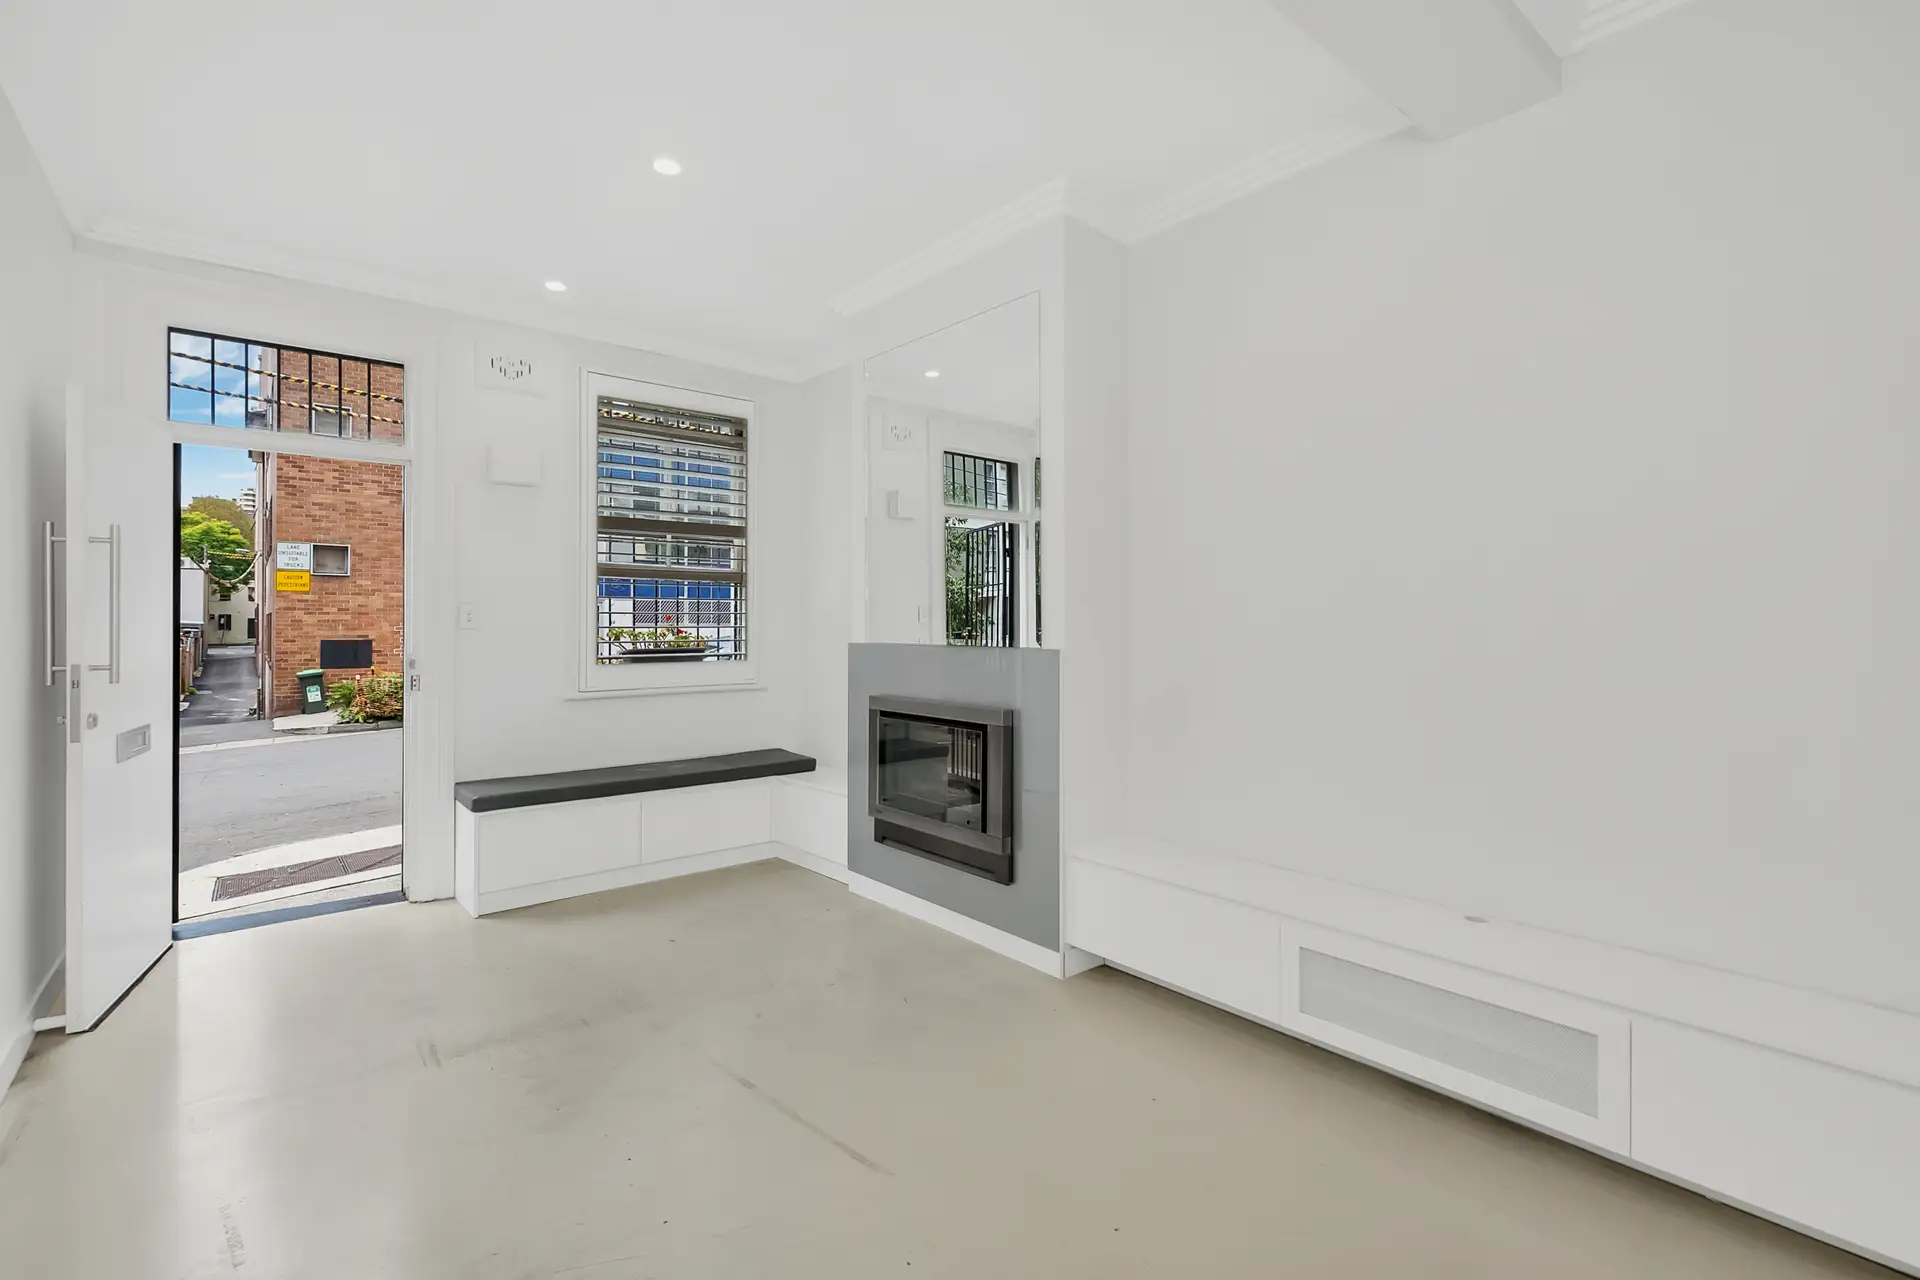 31 Yurong Street, Darlinghurst Sold by Adrian William